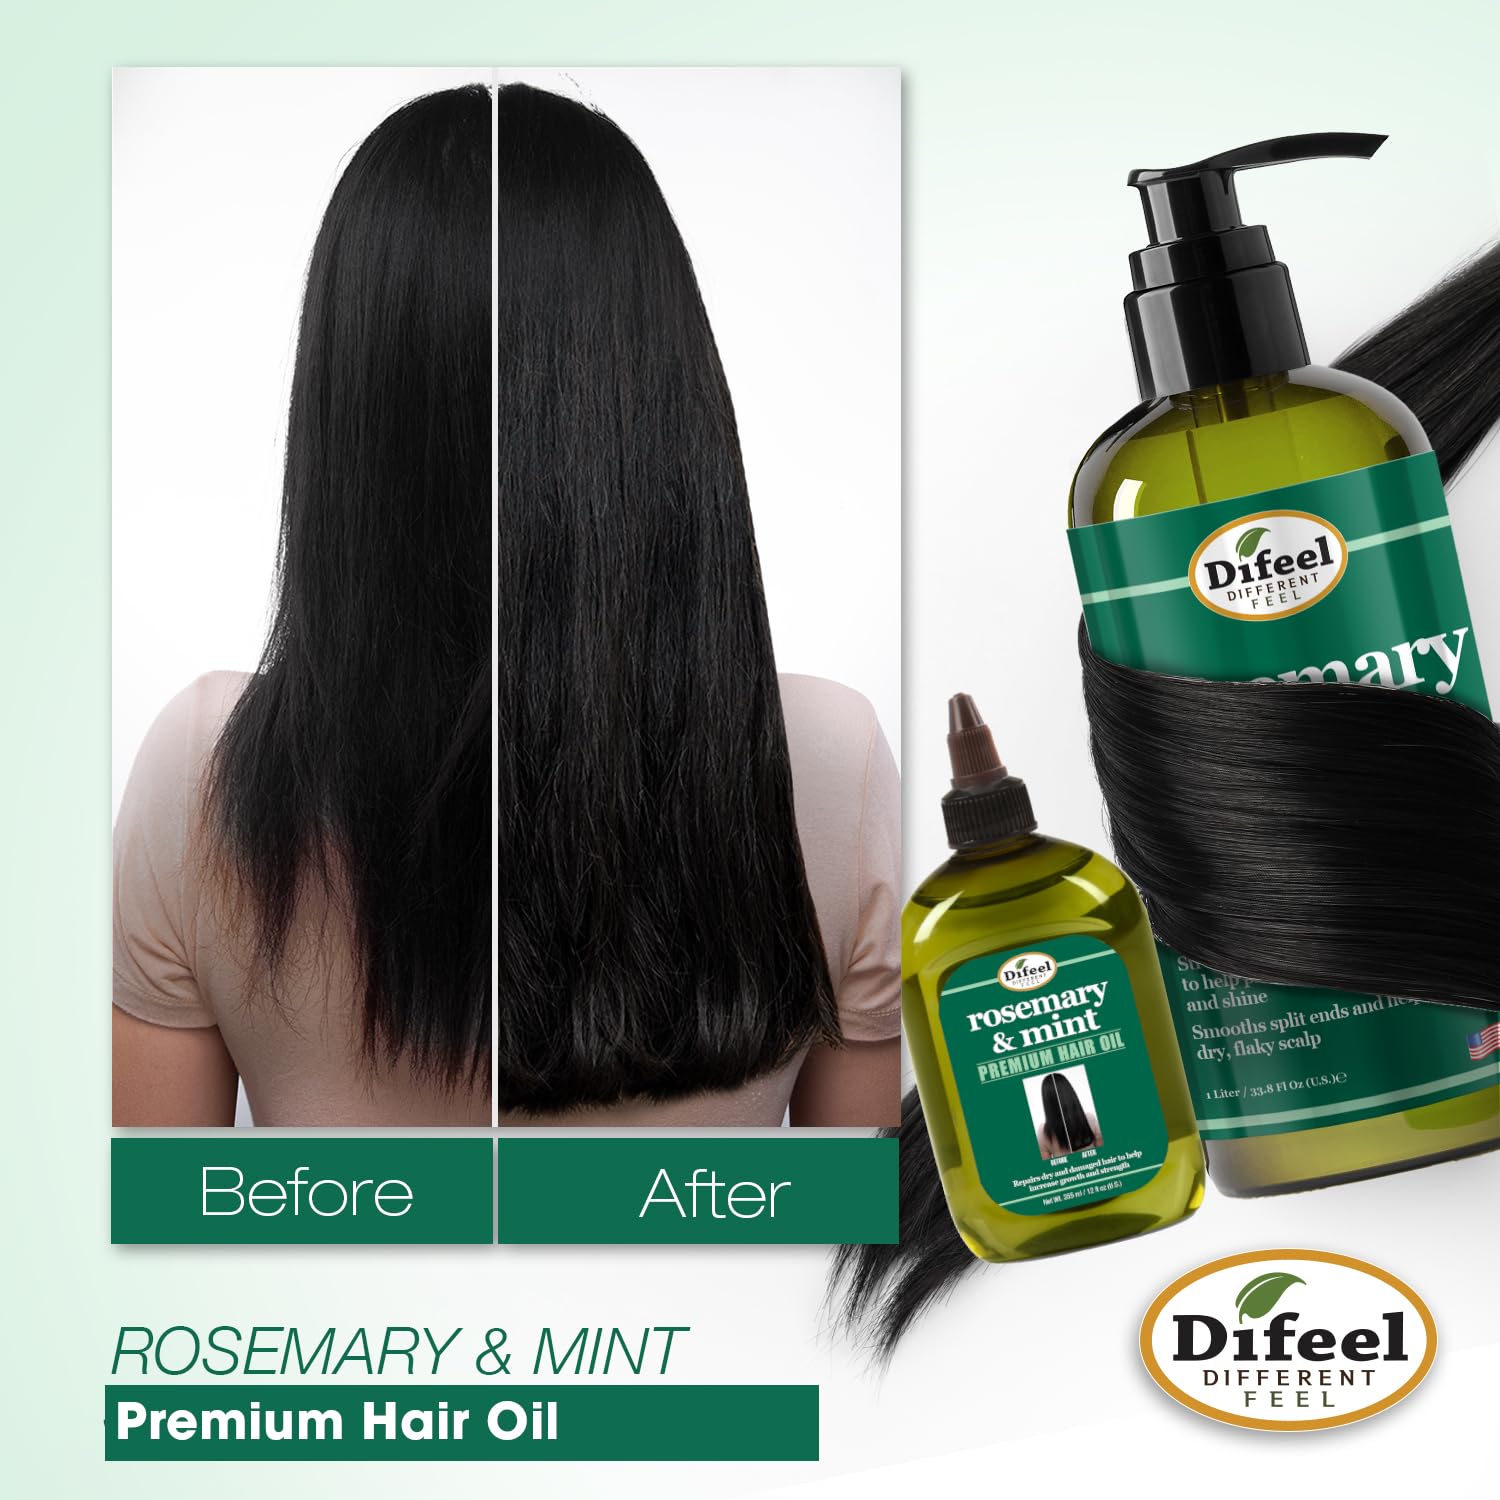 Difeel Rosemary and Mint Premium Hair Oil with Biotin - LARGE 12 oz. - Natural Rosemary Oil for Hair Growth & Biotin